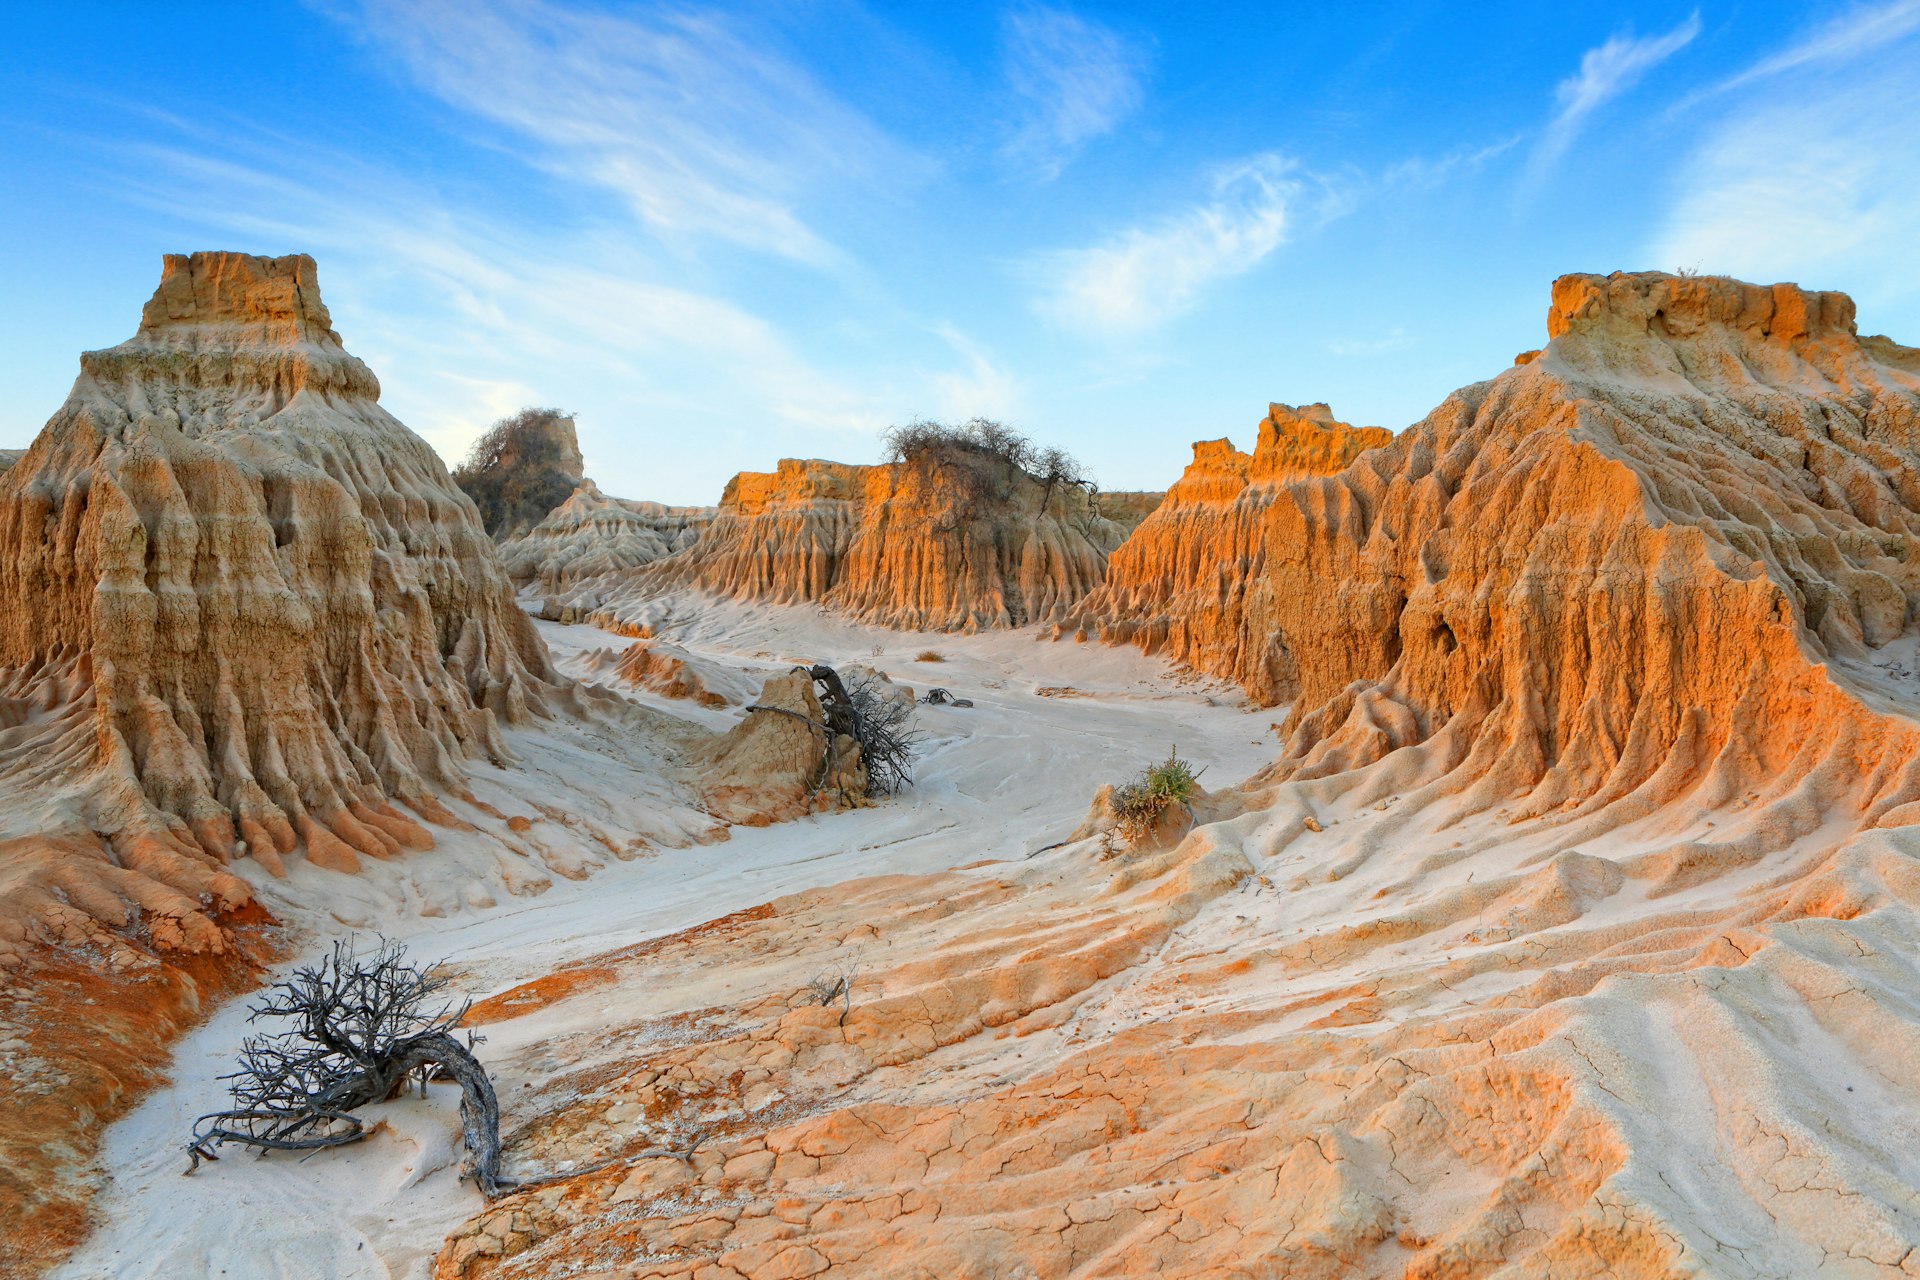 Golden rock formations stick up from the desert like towers, their sides scarred by old paths of water at Lake Mungo, Australia.